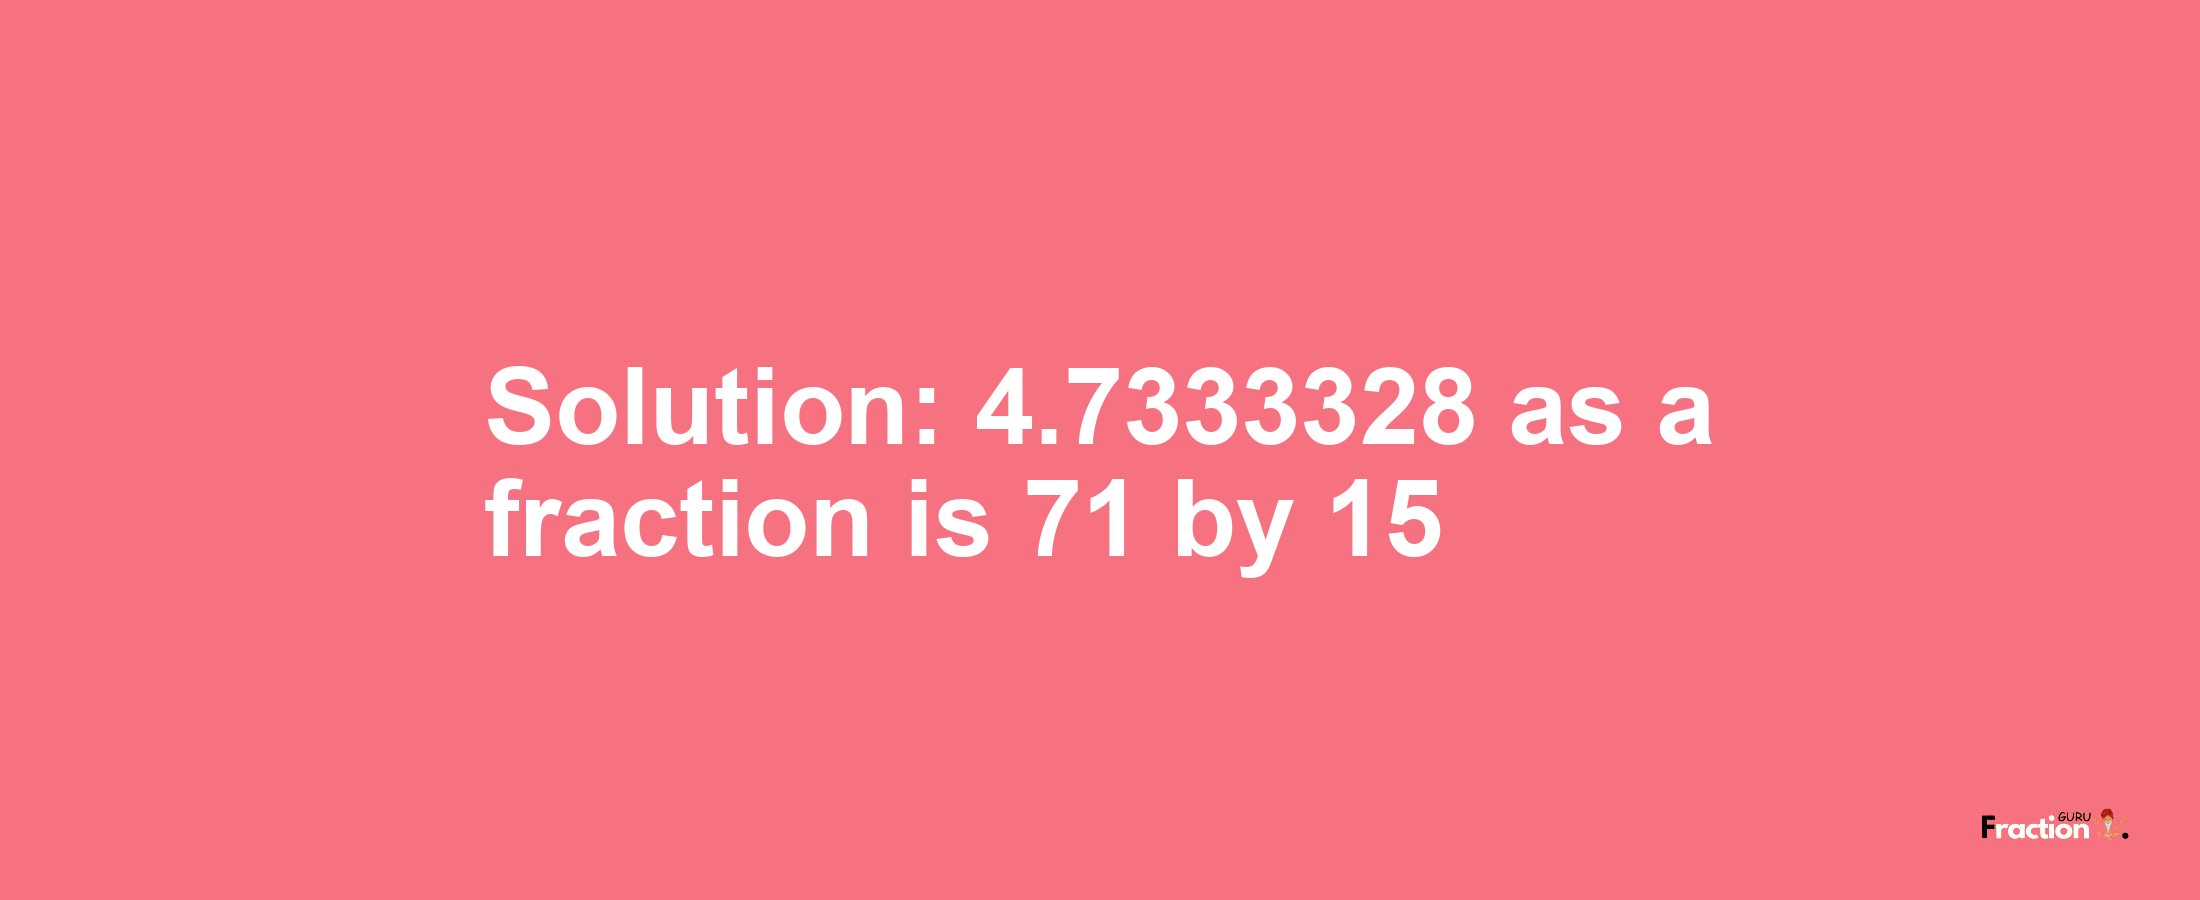 Solution:4.7333328 as a fraction is 71/15